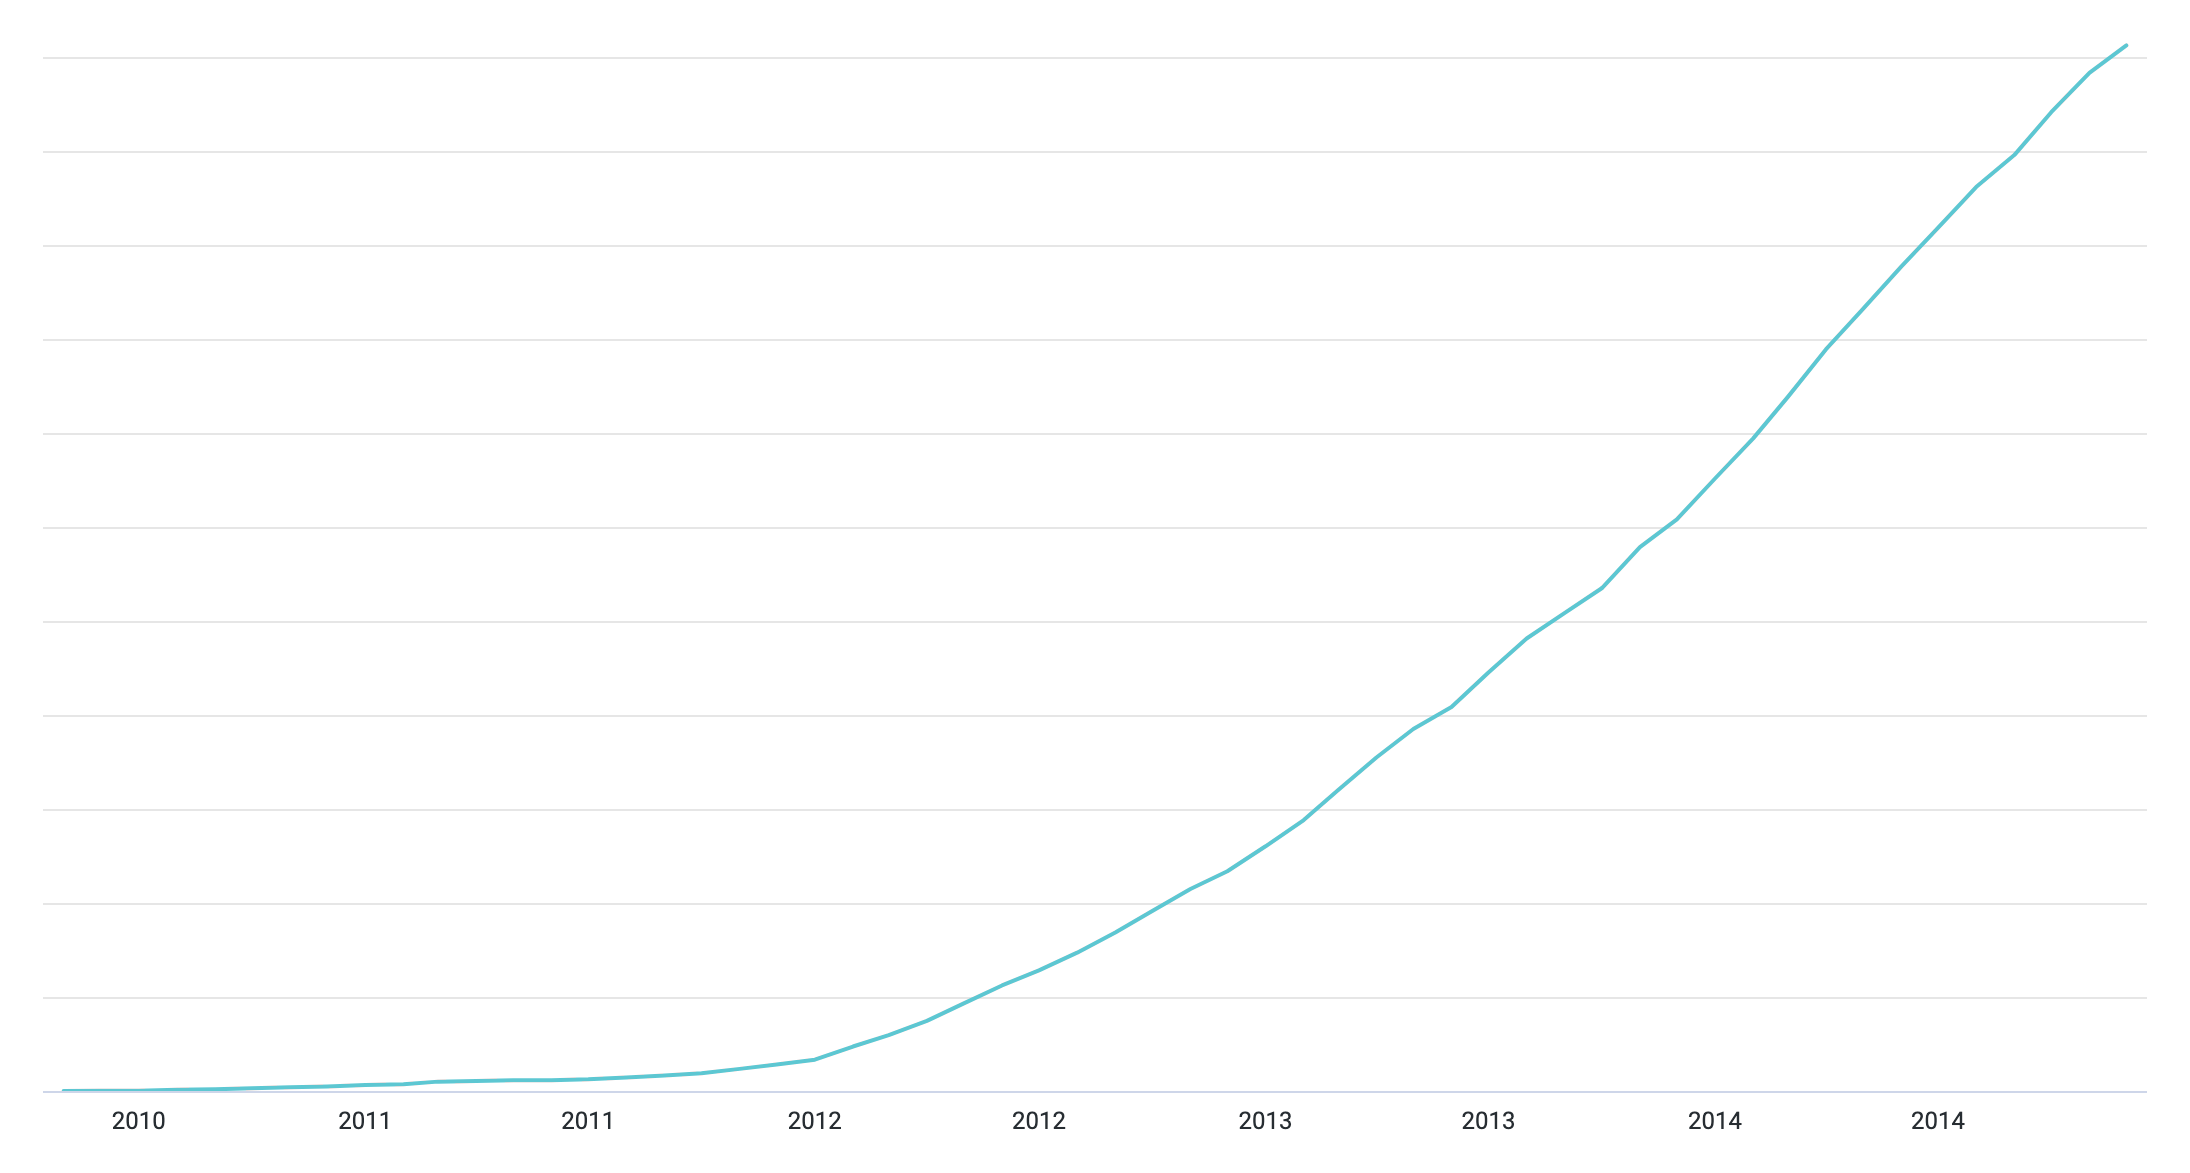 WP Engine's early growth curve